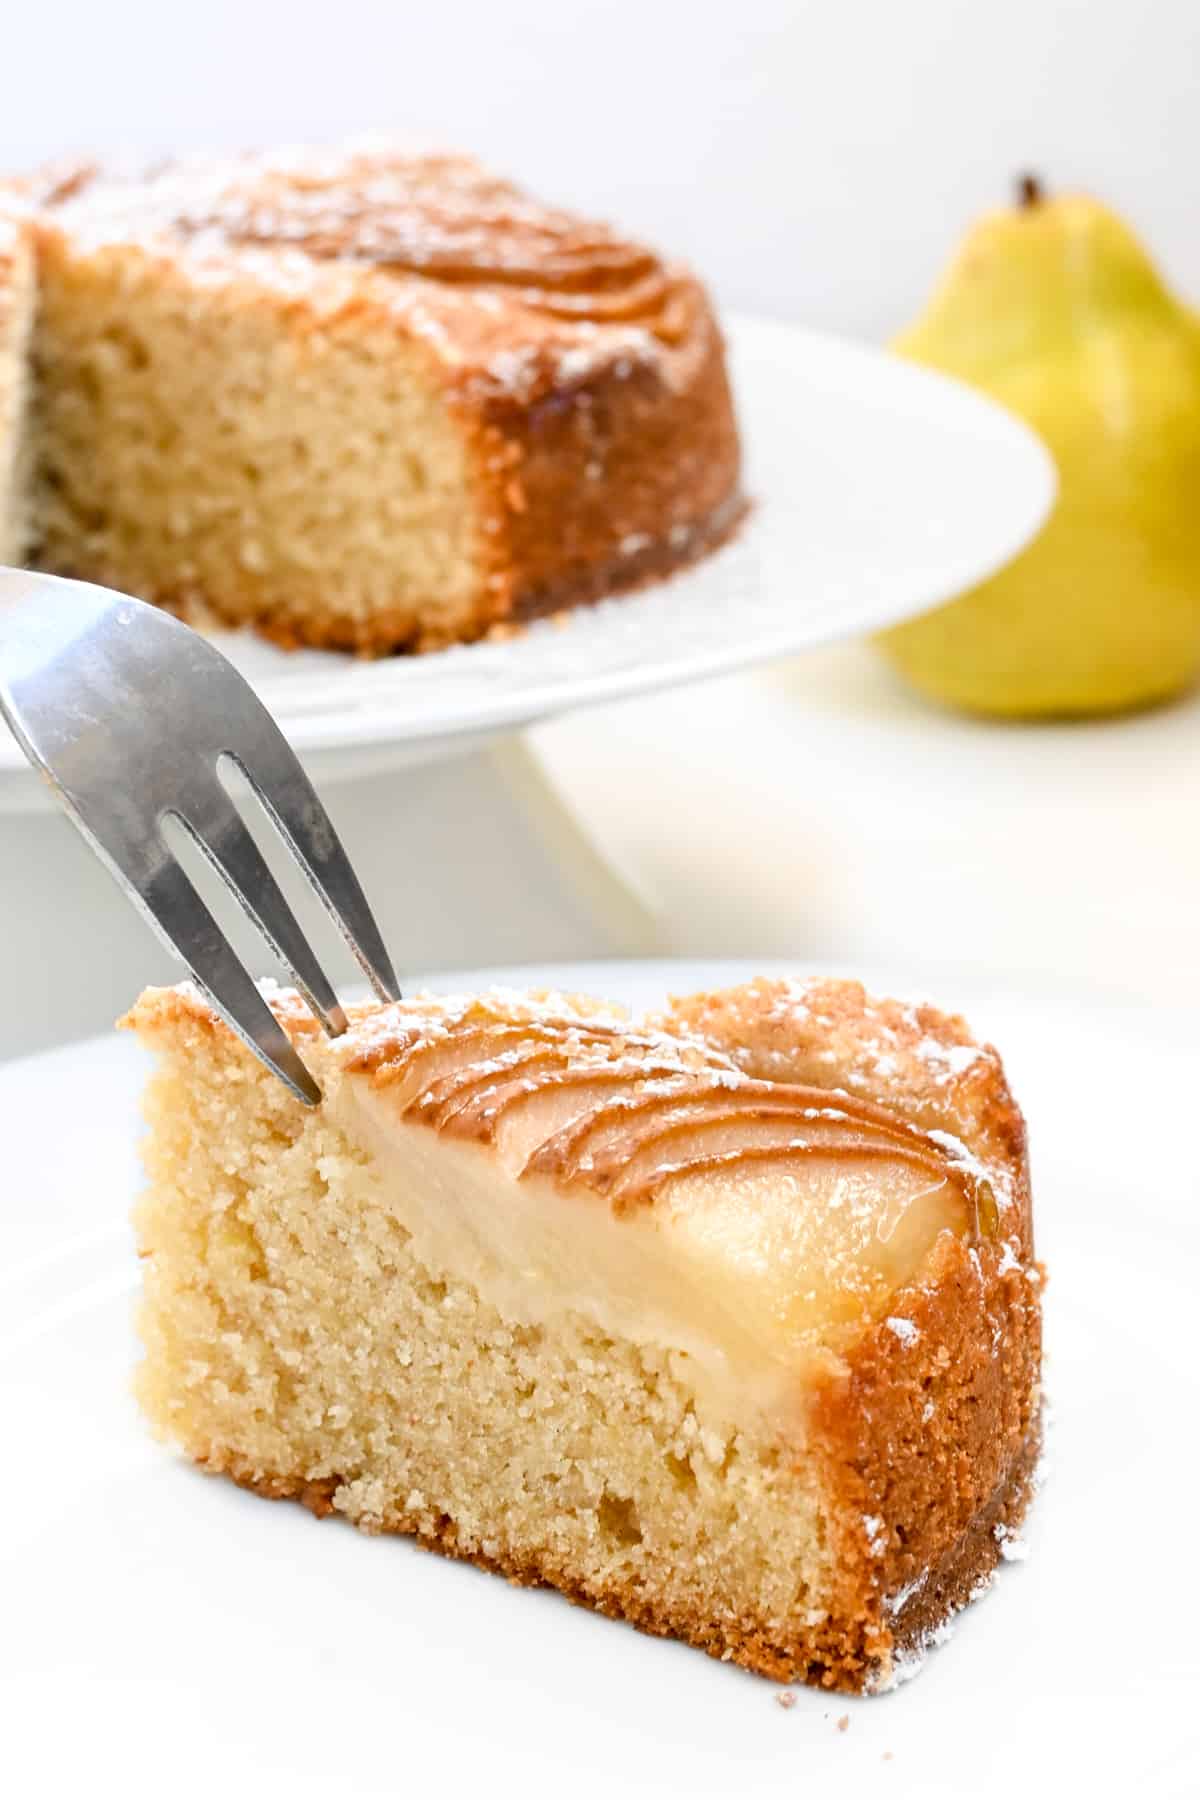 A fork cutting into a slice of cake with slices of pear arranged on top.